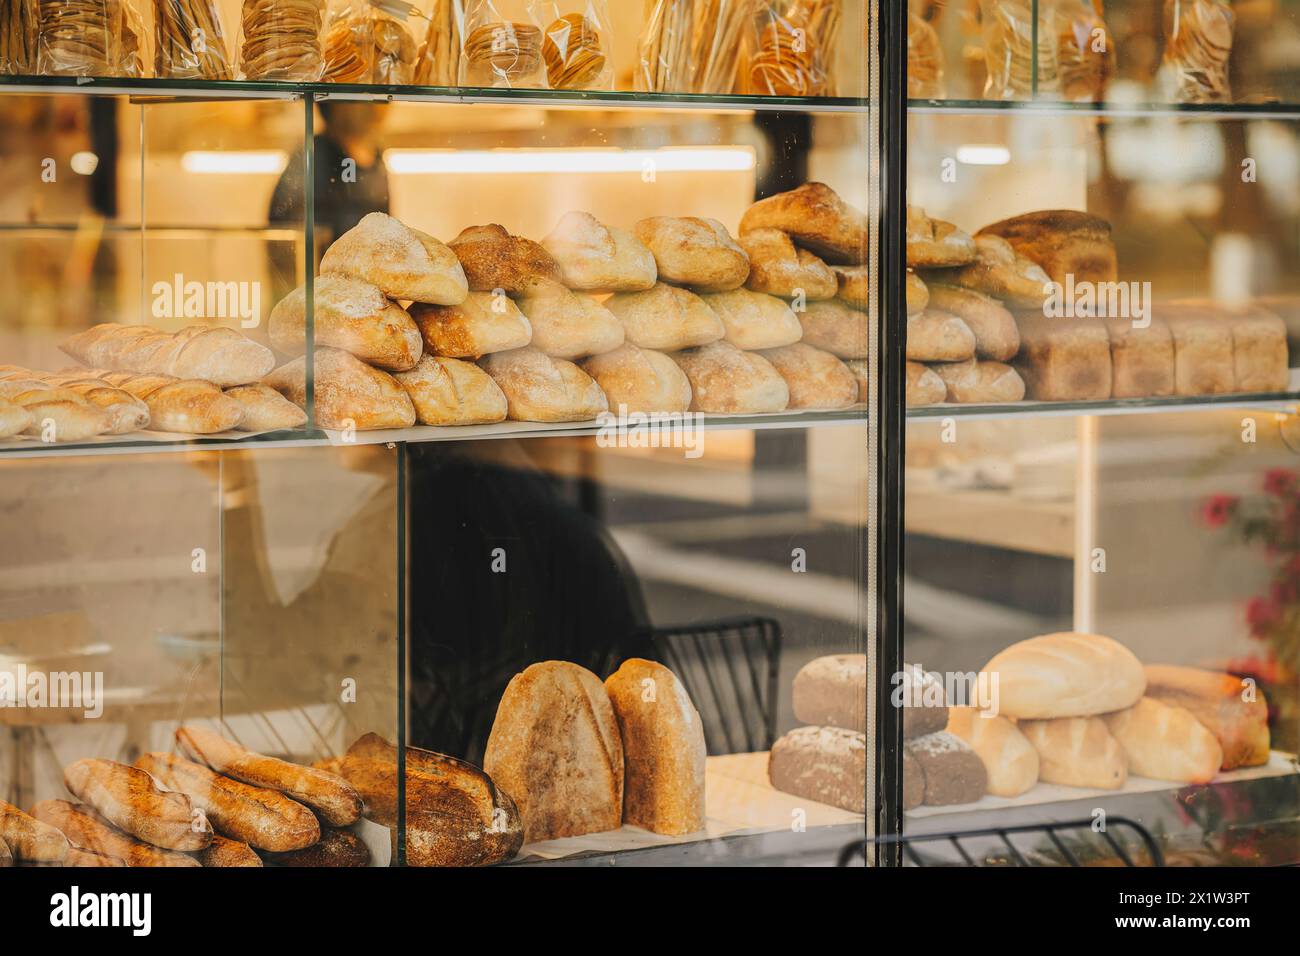 Bakery display case with variety of breads and pastries. Blurred view through store window Stock Photo